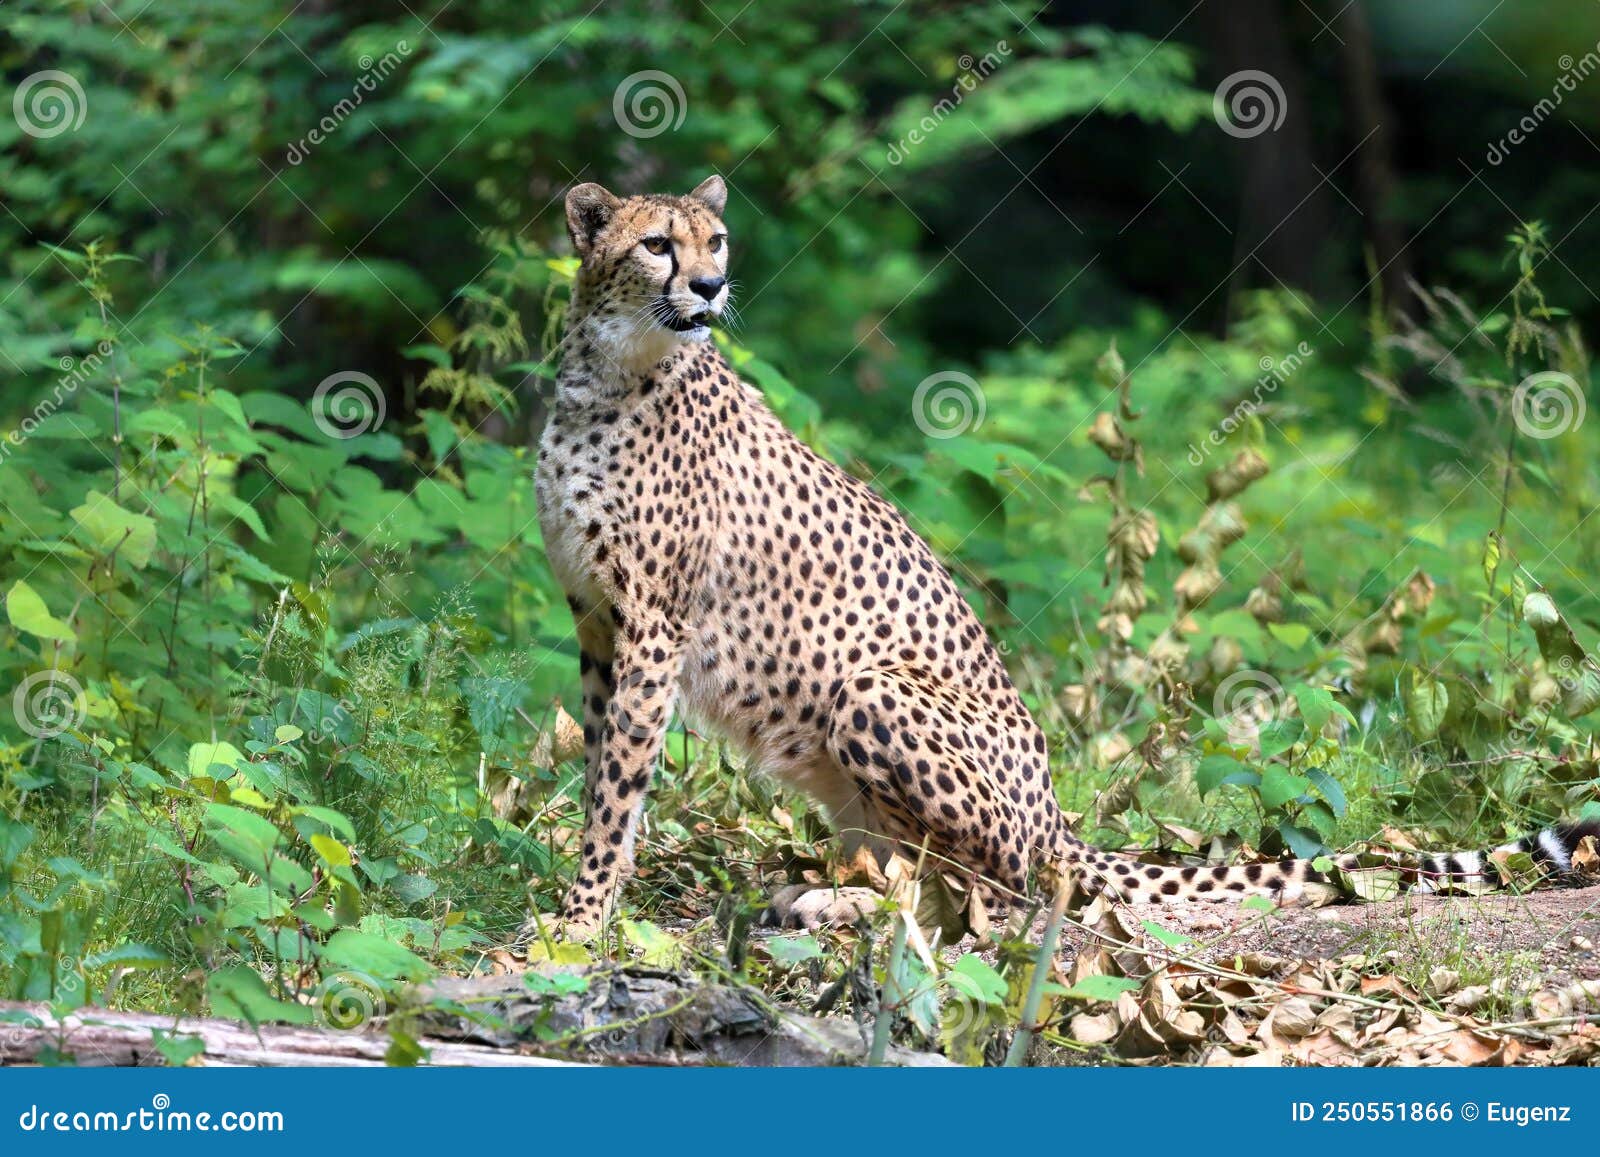 the cheetah acinonyx jubatus is a large cat and native to africa and central iran.